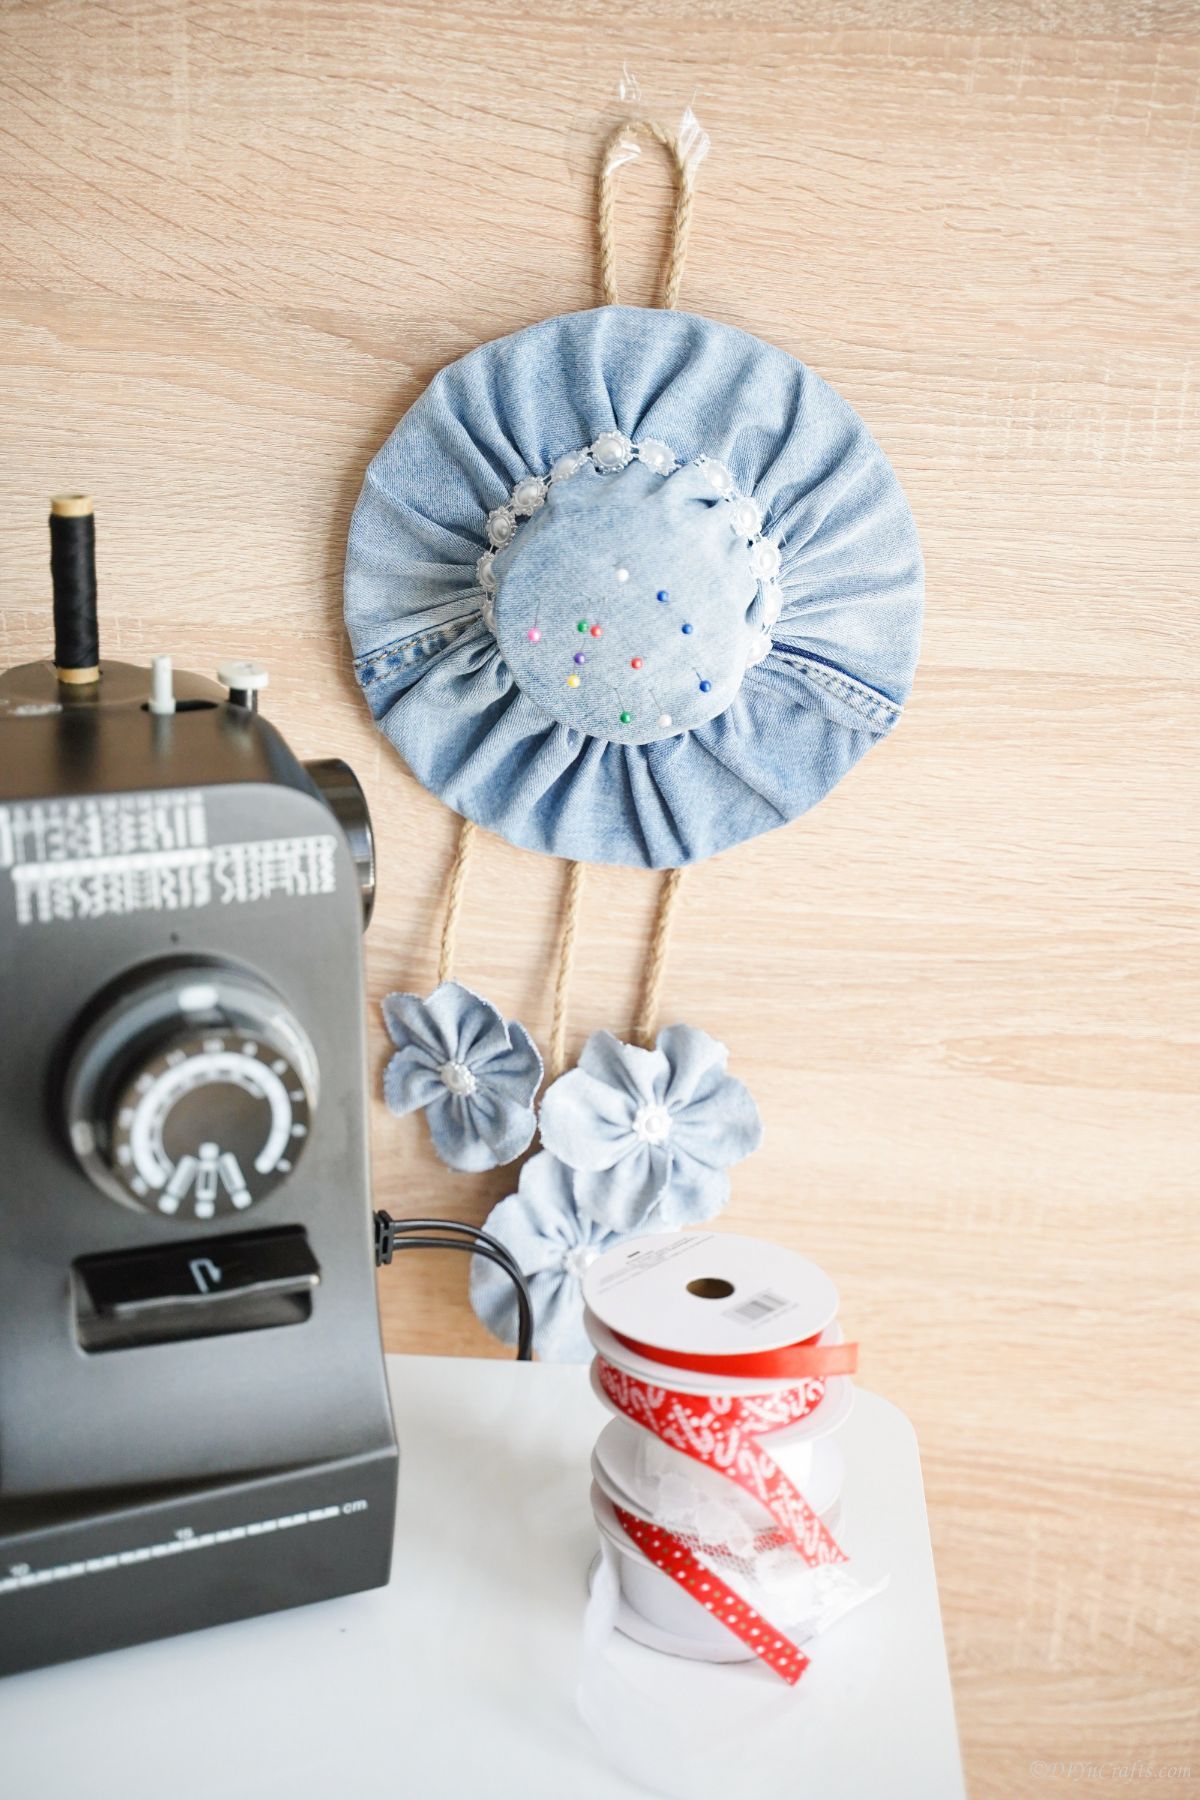 denim pin cushion hanging on wall by sewing machine table